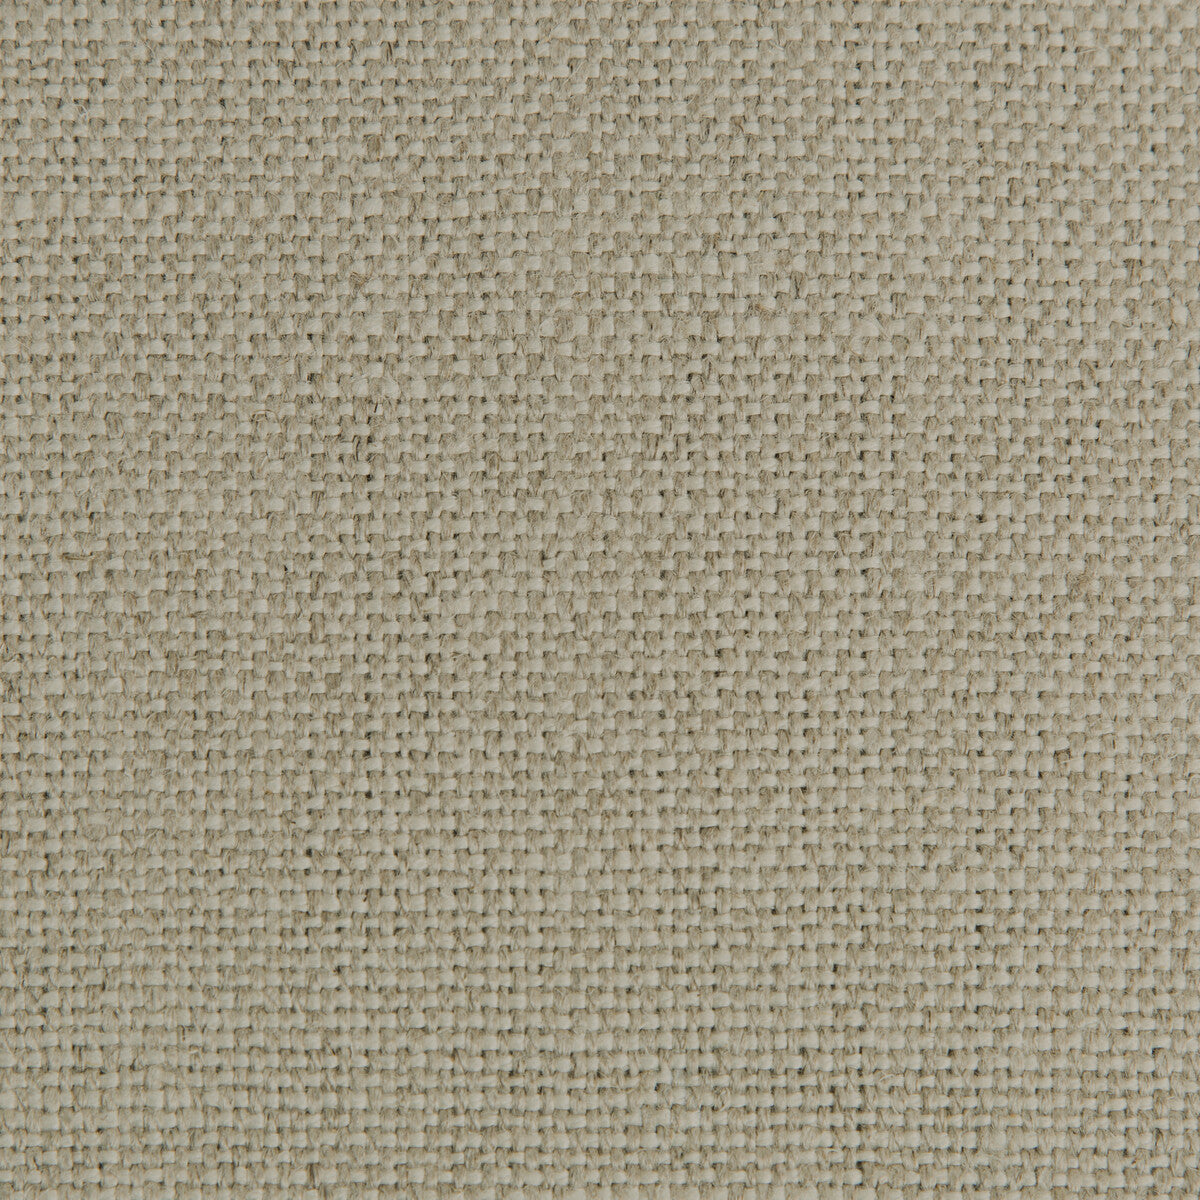 Hampton Linen fabric in linen color - pattern 2012171.161.0 - by Lee Jofa in the Colour Complements II collection